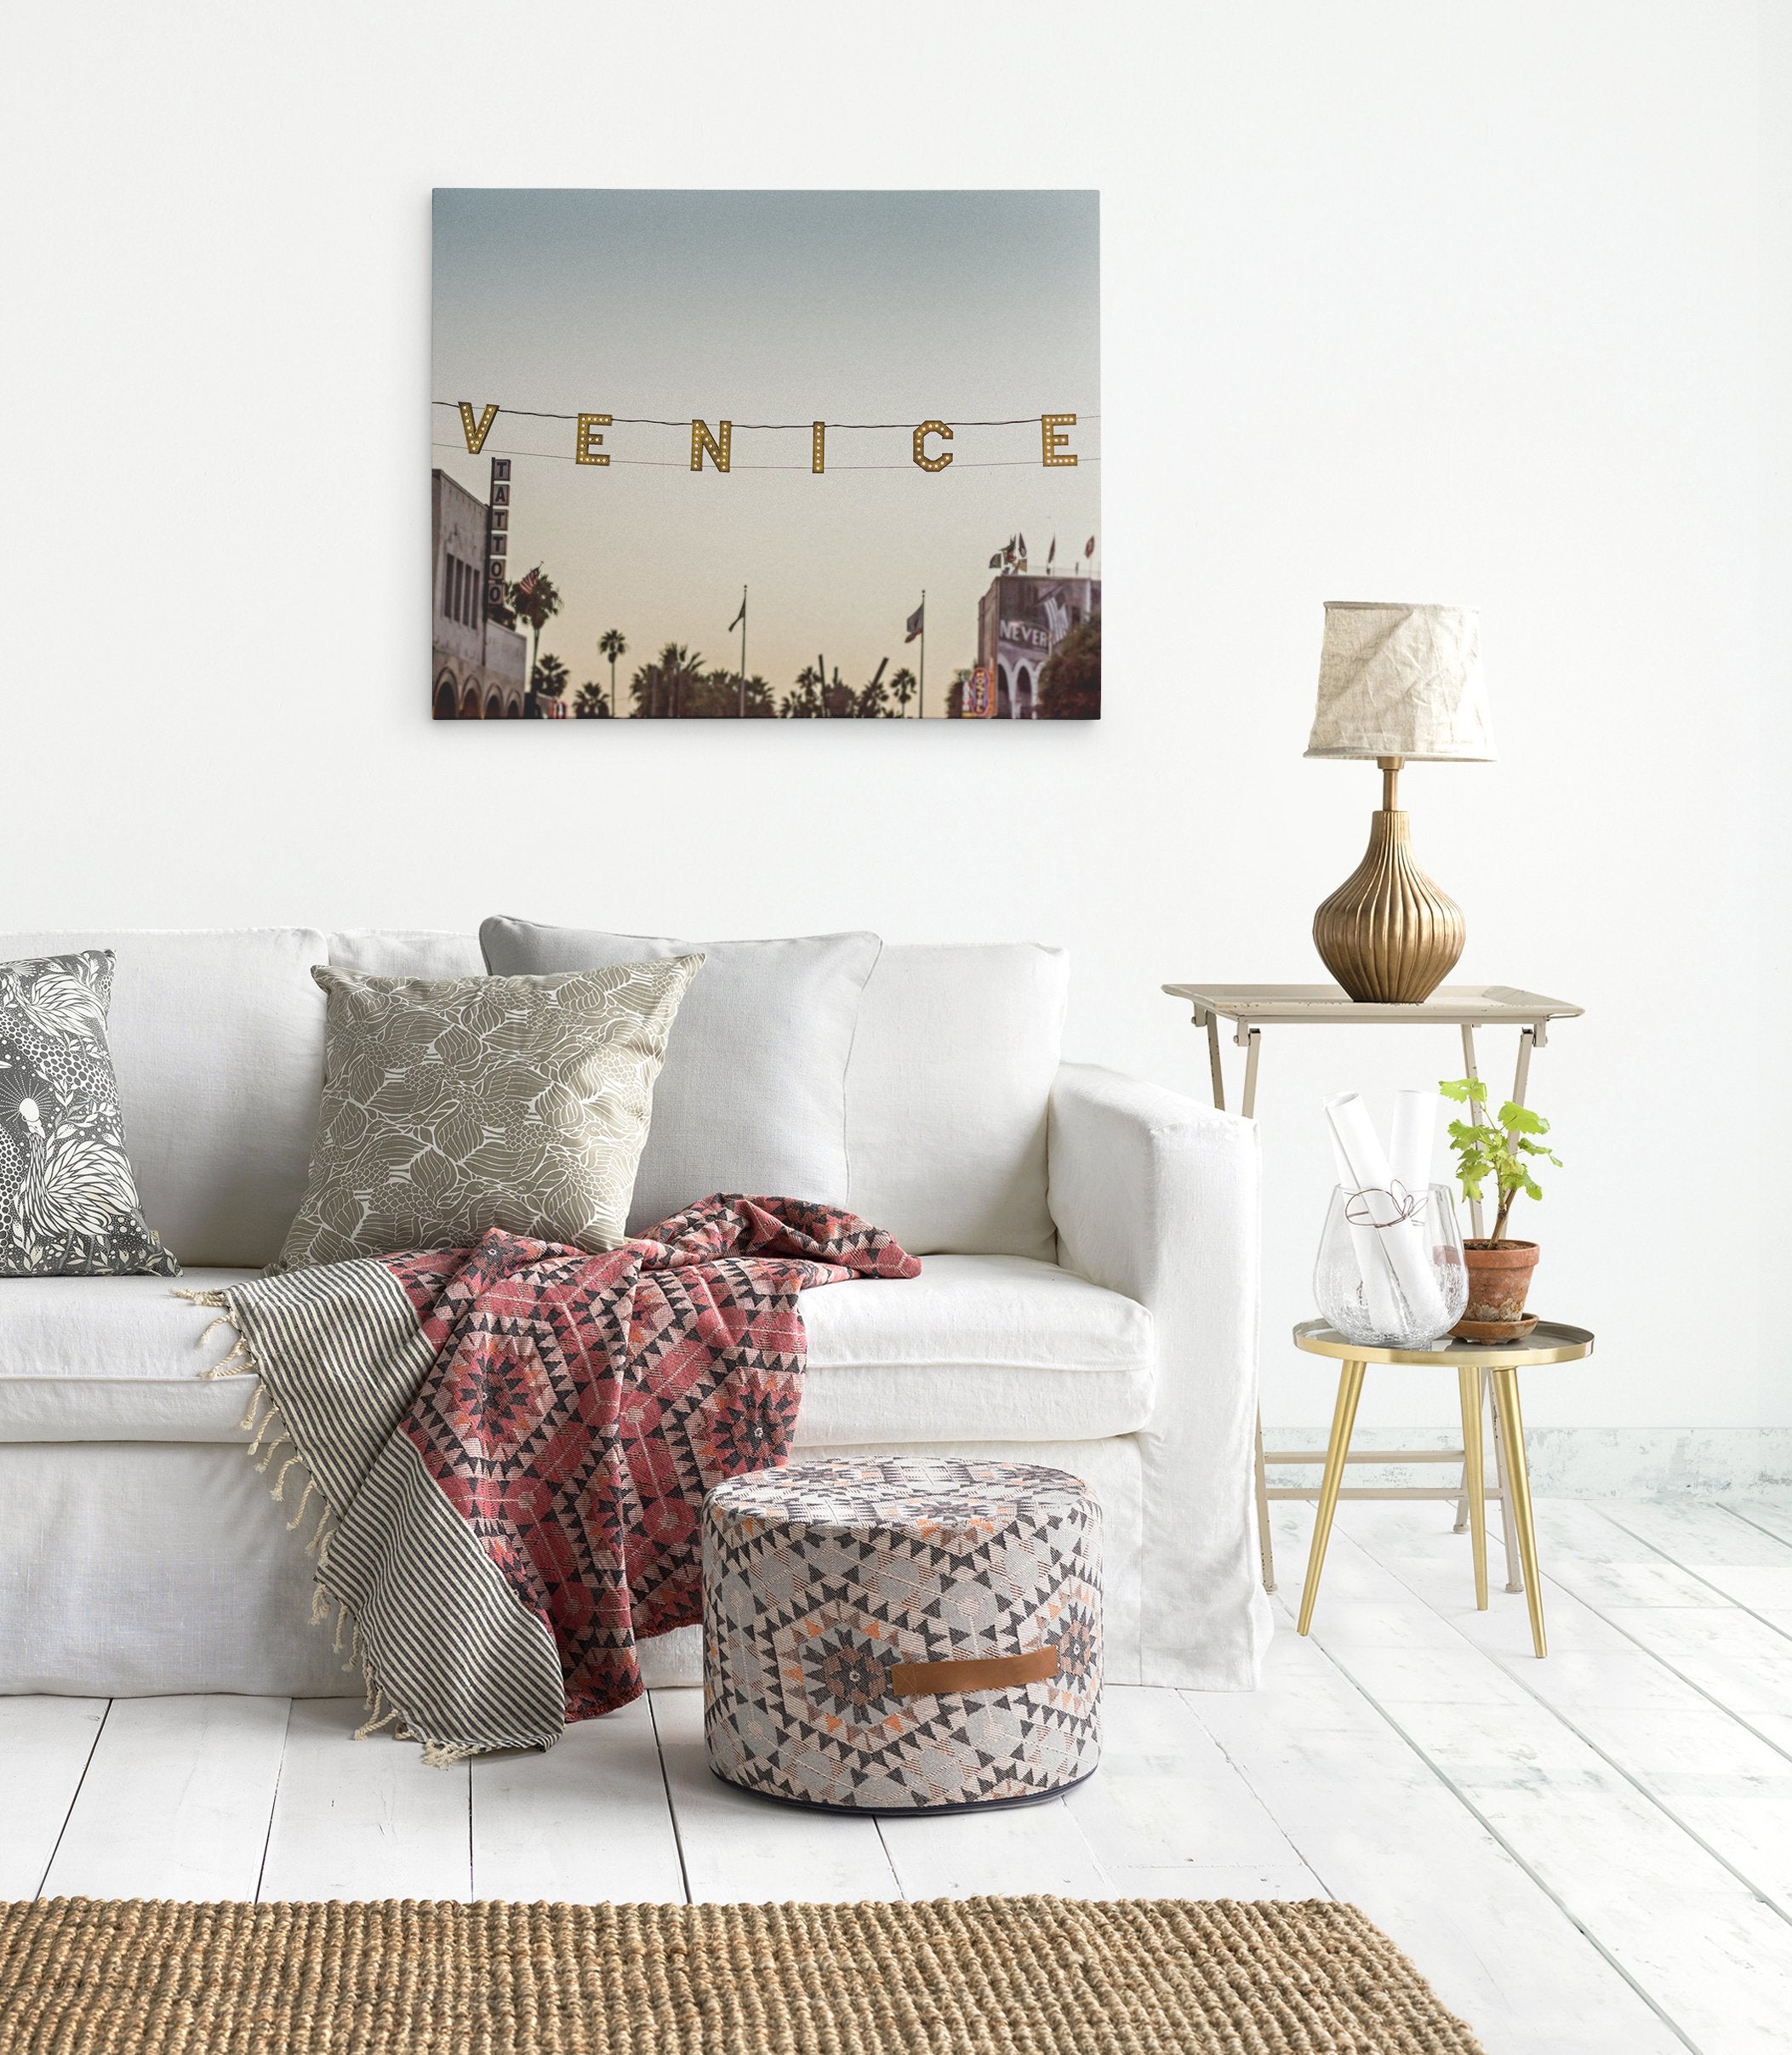 Canvas print of the Venice Beach sign in a Californian themed living room